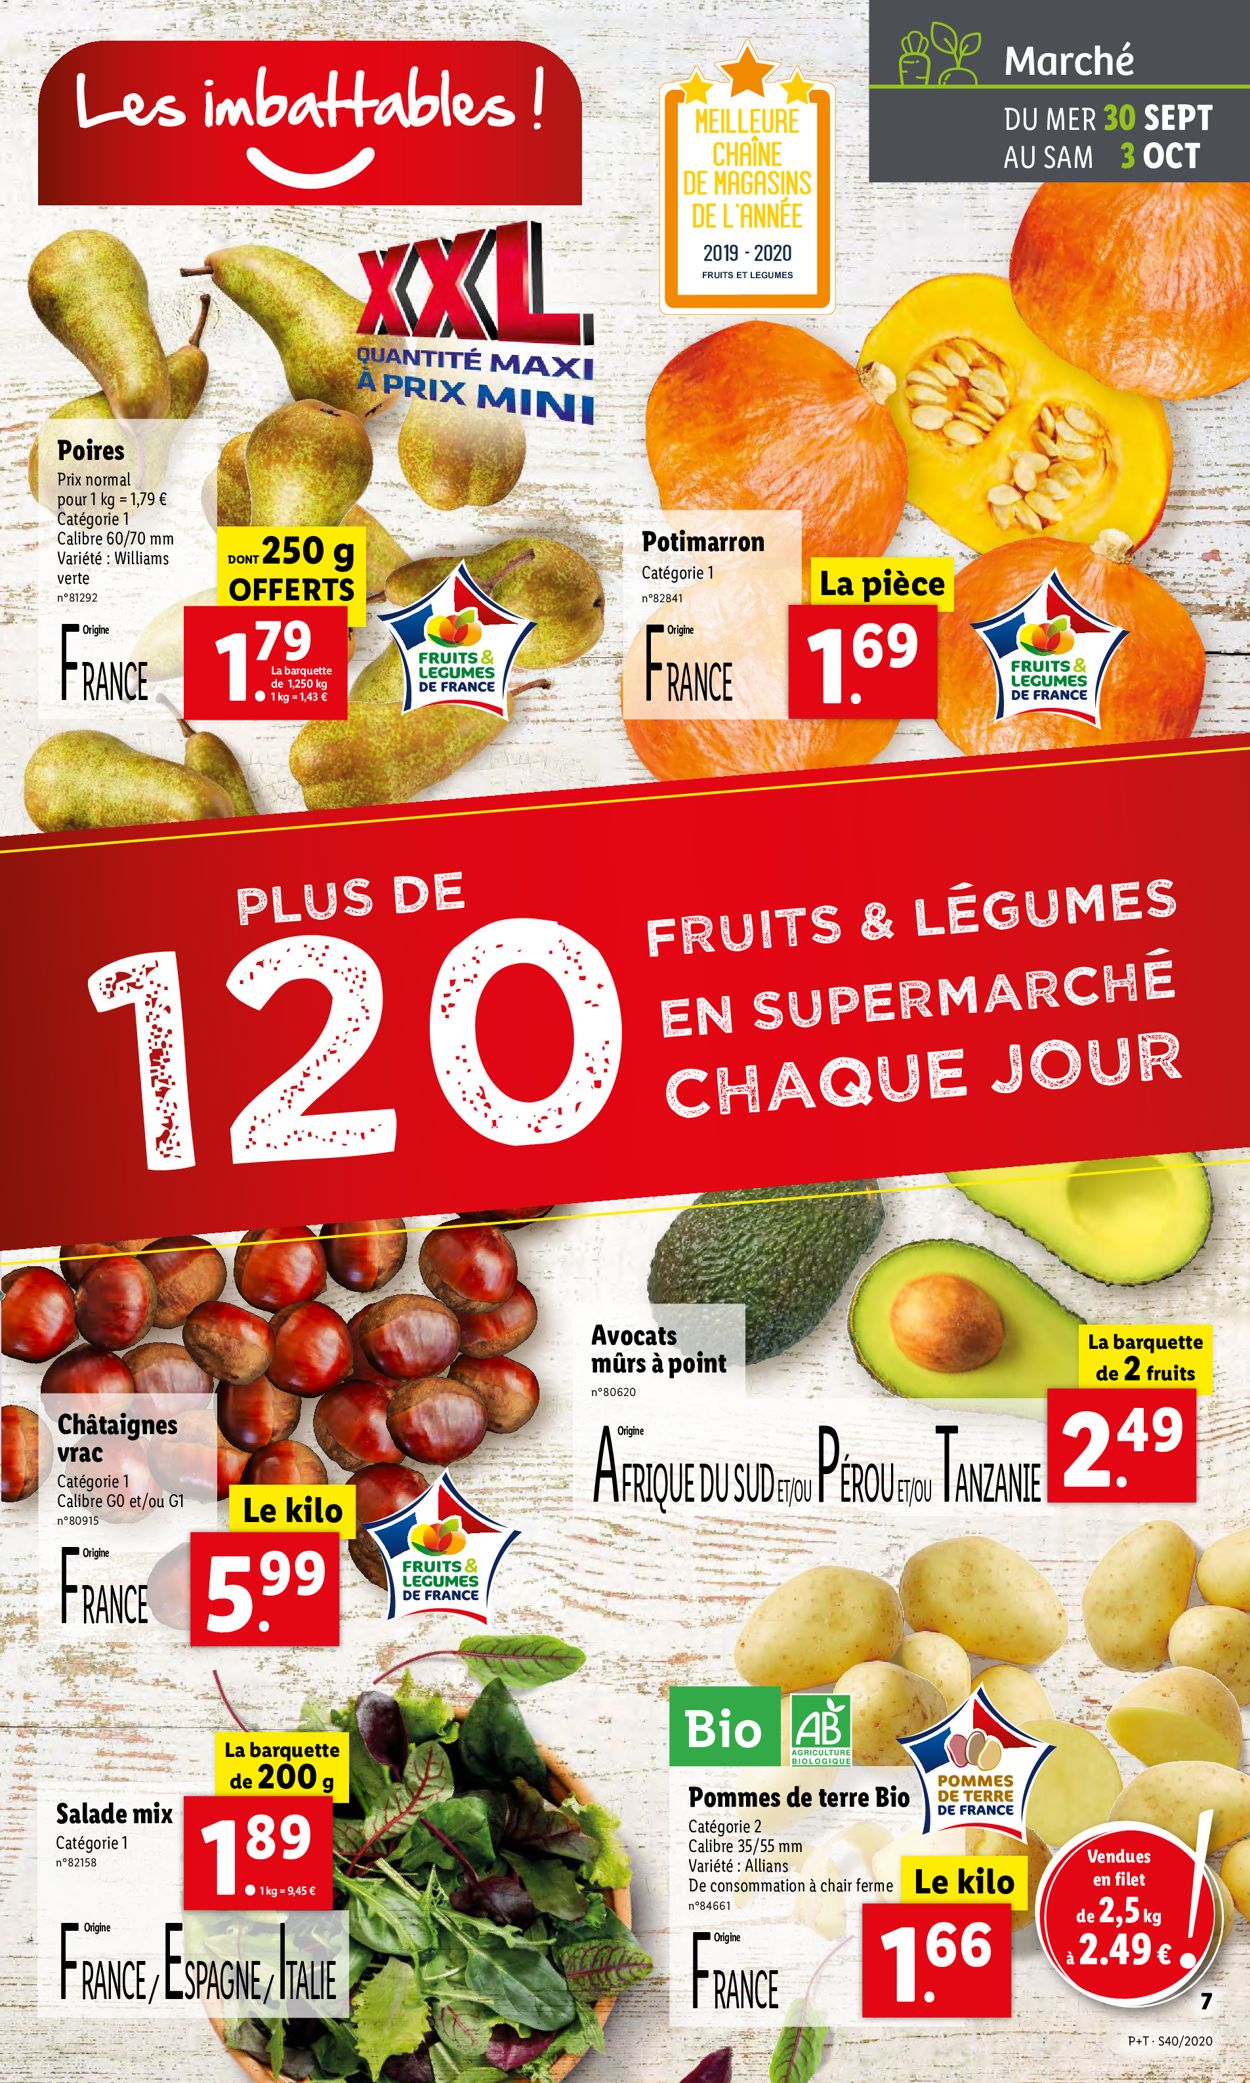 Lidl Catalogue - 30.09-06.10.2020 (Page 7)